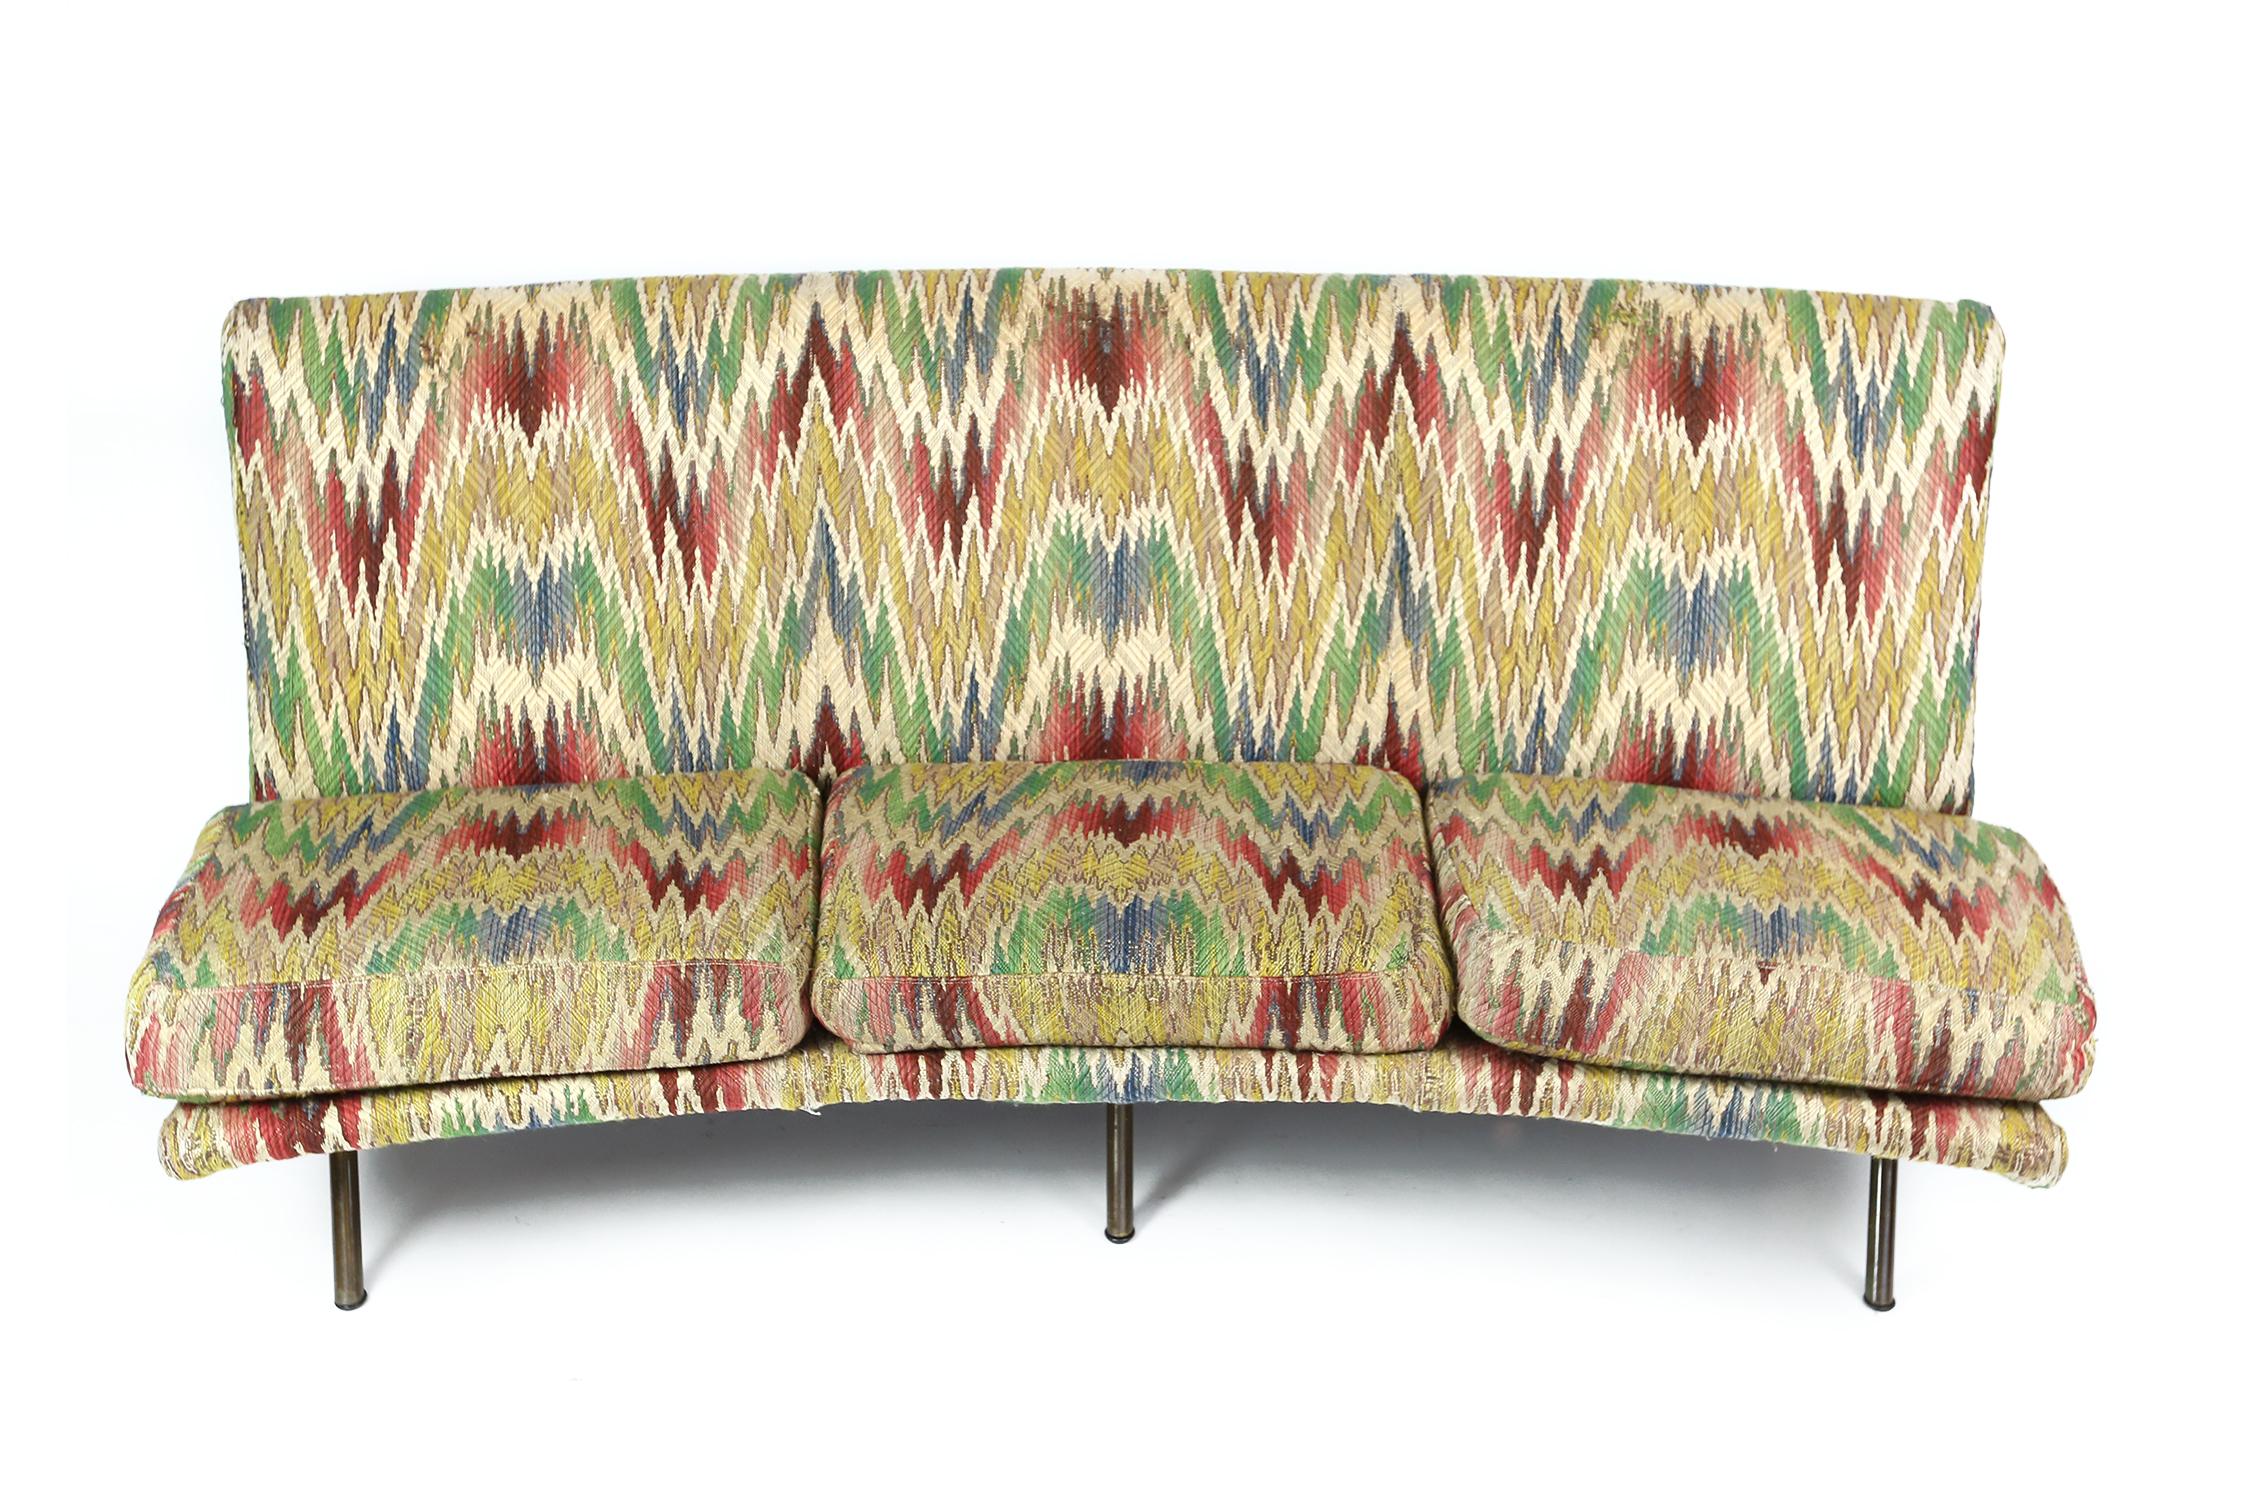 This three-seat Triennale sofa was designed by Marco Zanuso in the 1950s and produced by Arflex. It was shown in 1951 at the Triennale di Milano, the most important international design fair in the postwar era. This piece has still his original